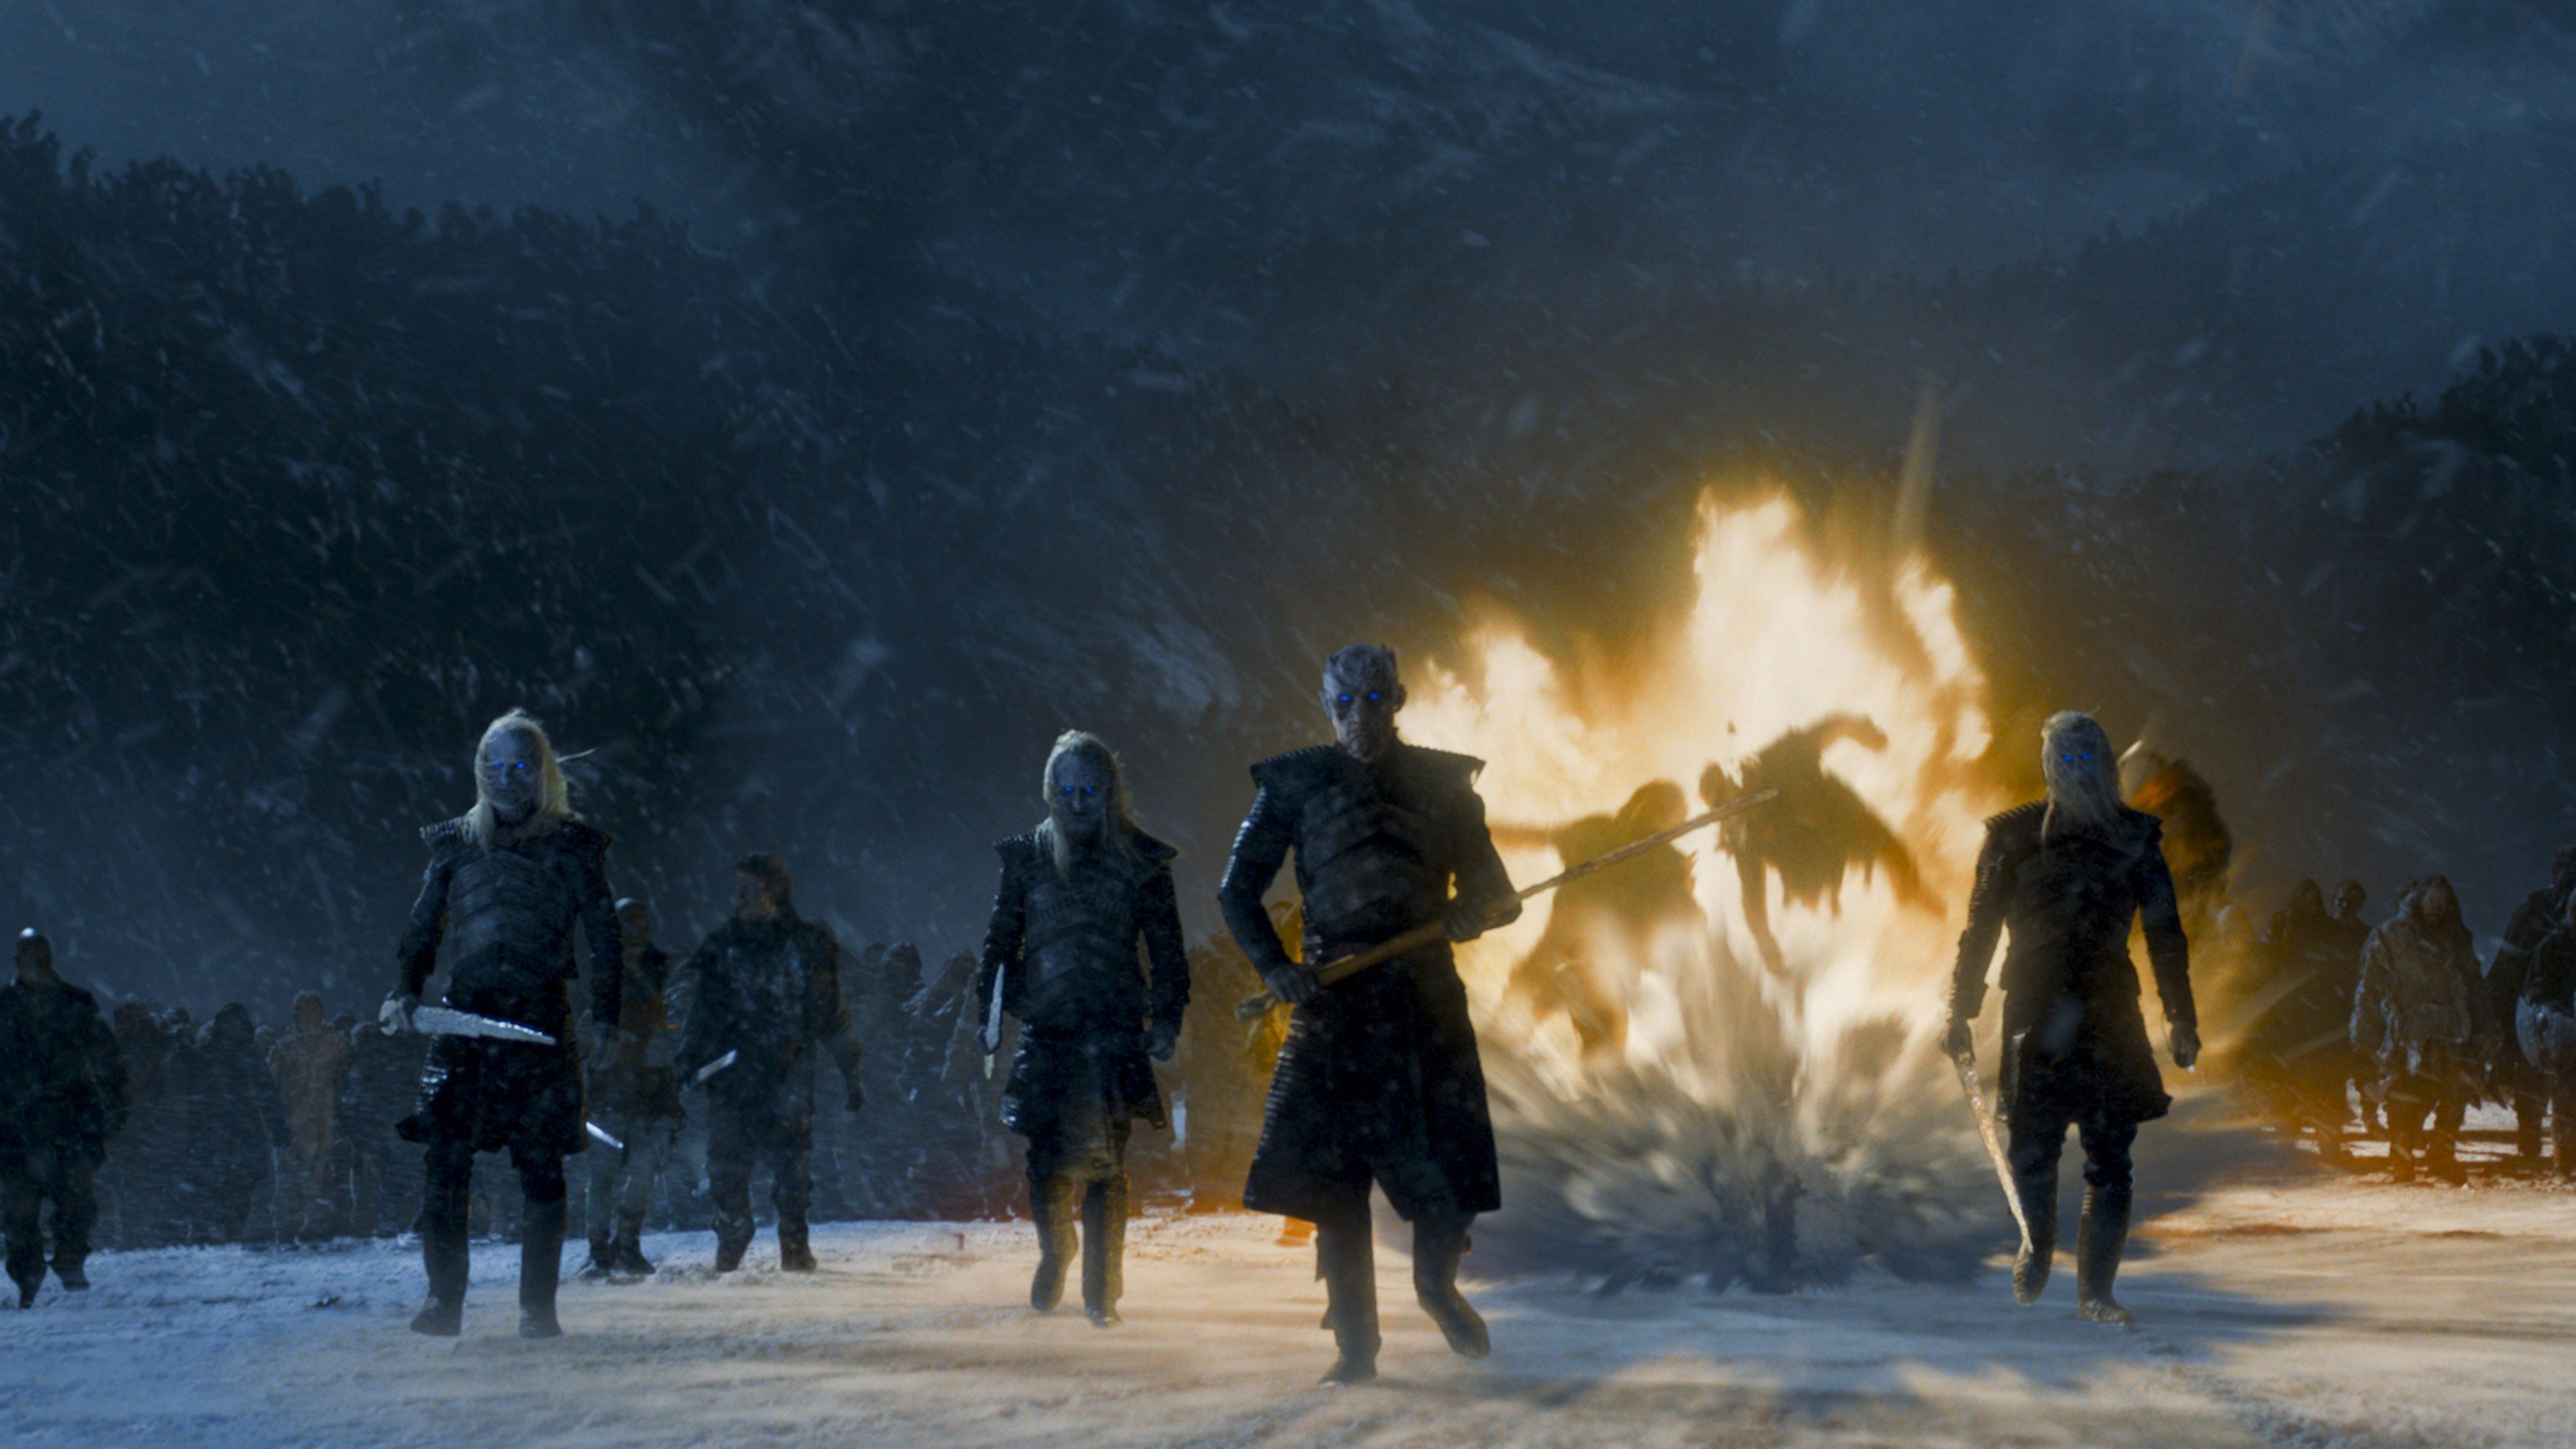 Trace the History of the White Walkers in 'Game of Thrones